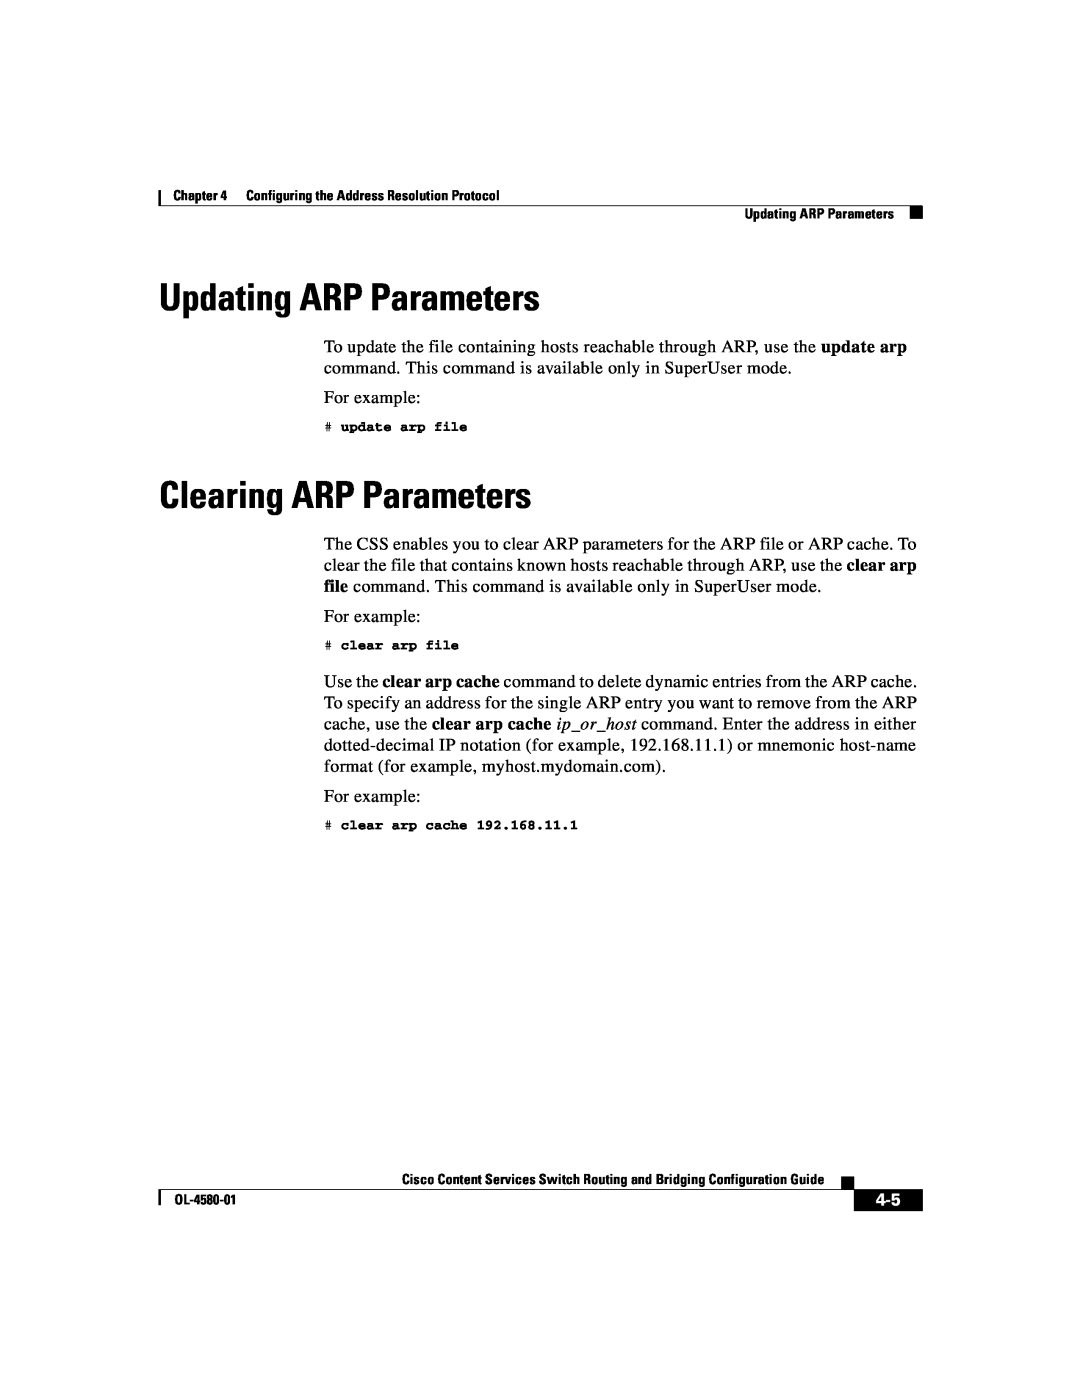 Cisco Systems OL-4580-01 manual Updating ARP Parameters, Clearing ARP Parameters 